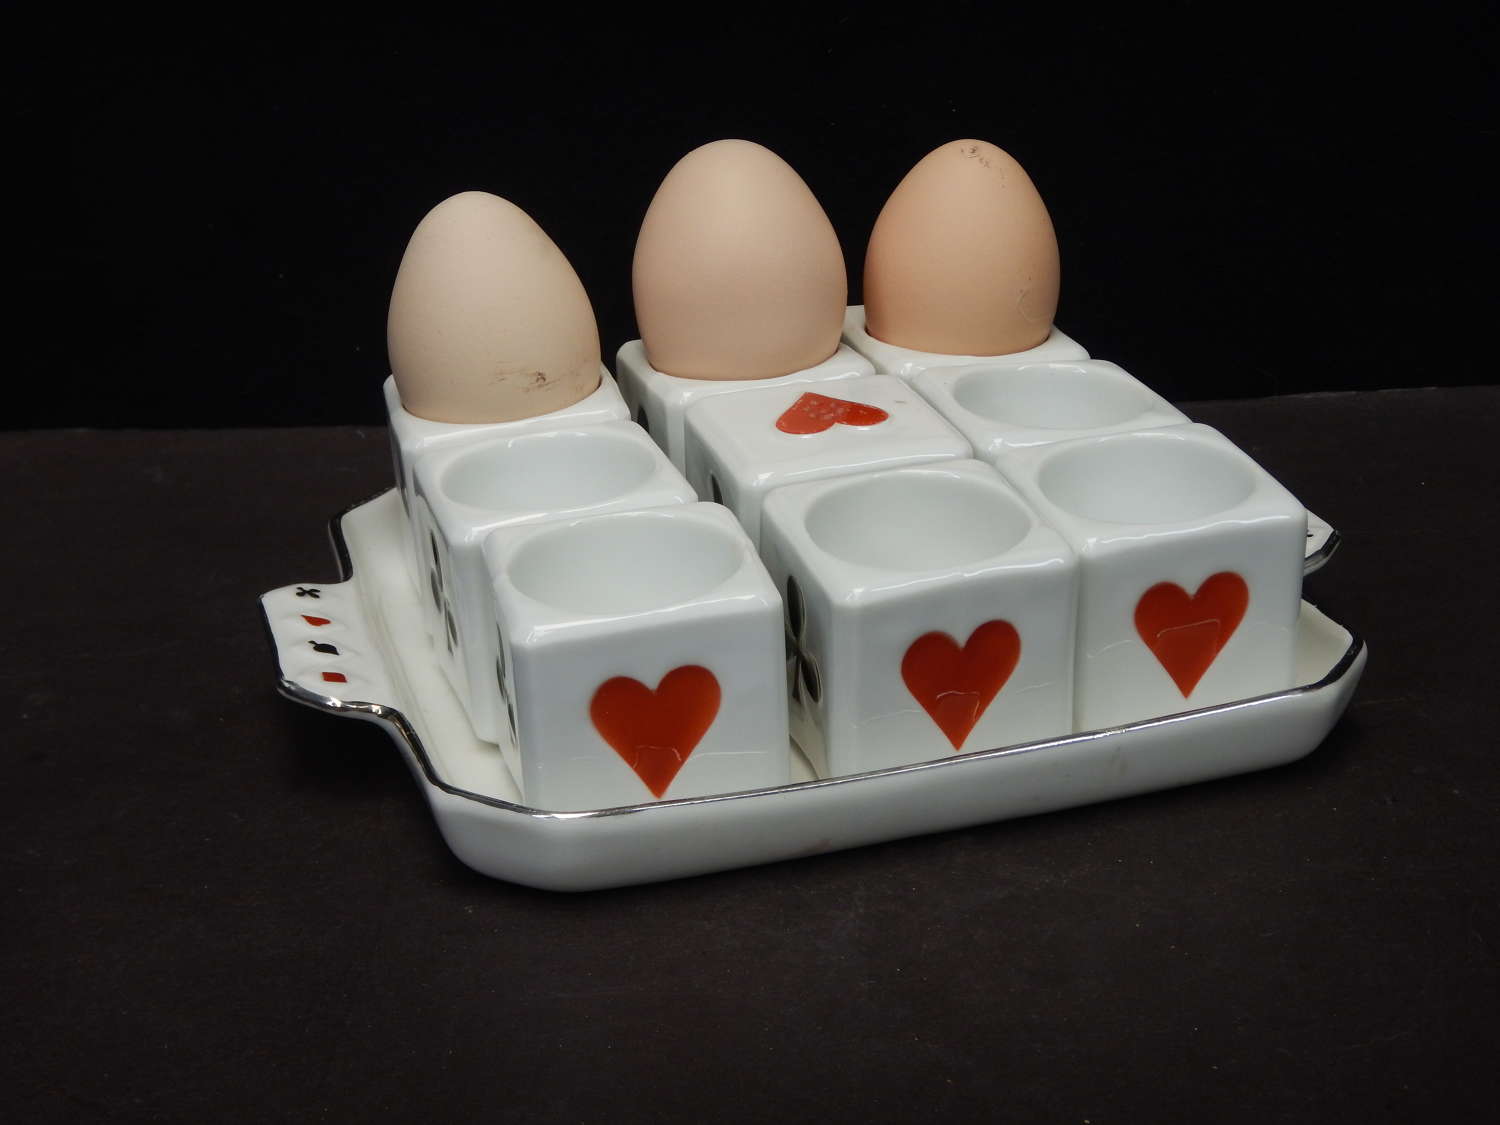 The Gamblers Breakfast Set - Eight Cube Egg Cups and Salt Cellar